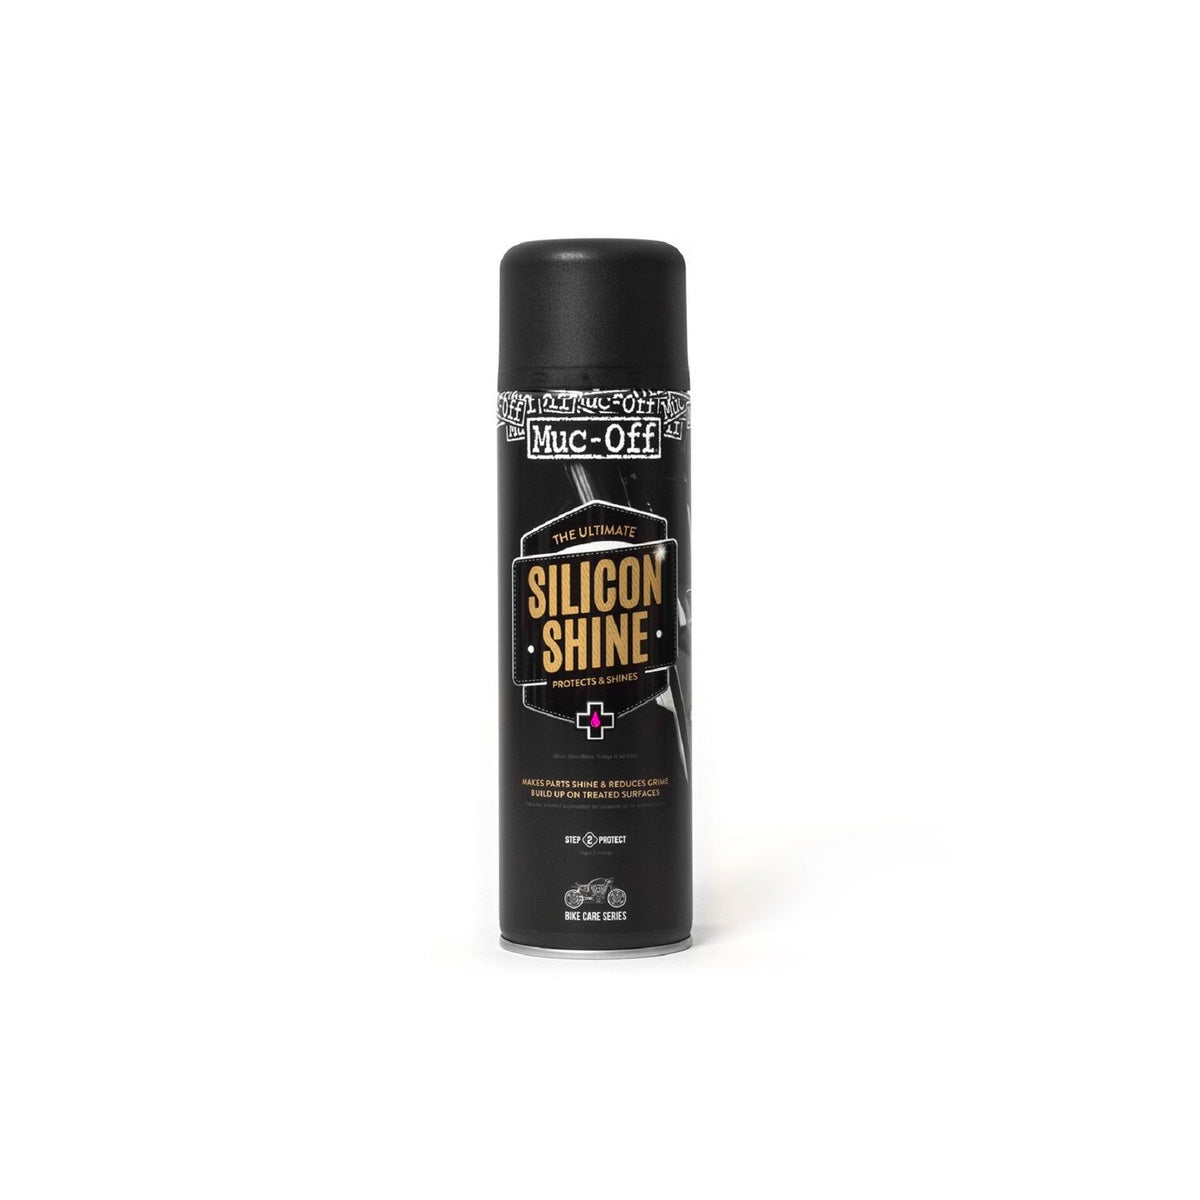 MOTORCYCLE SILICON SHINE - MUC-OFF